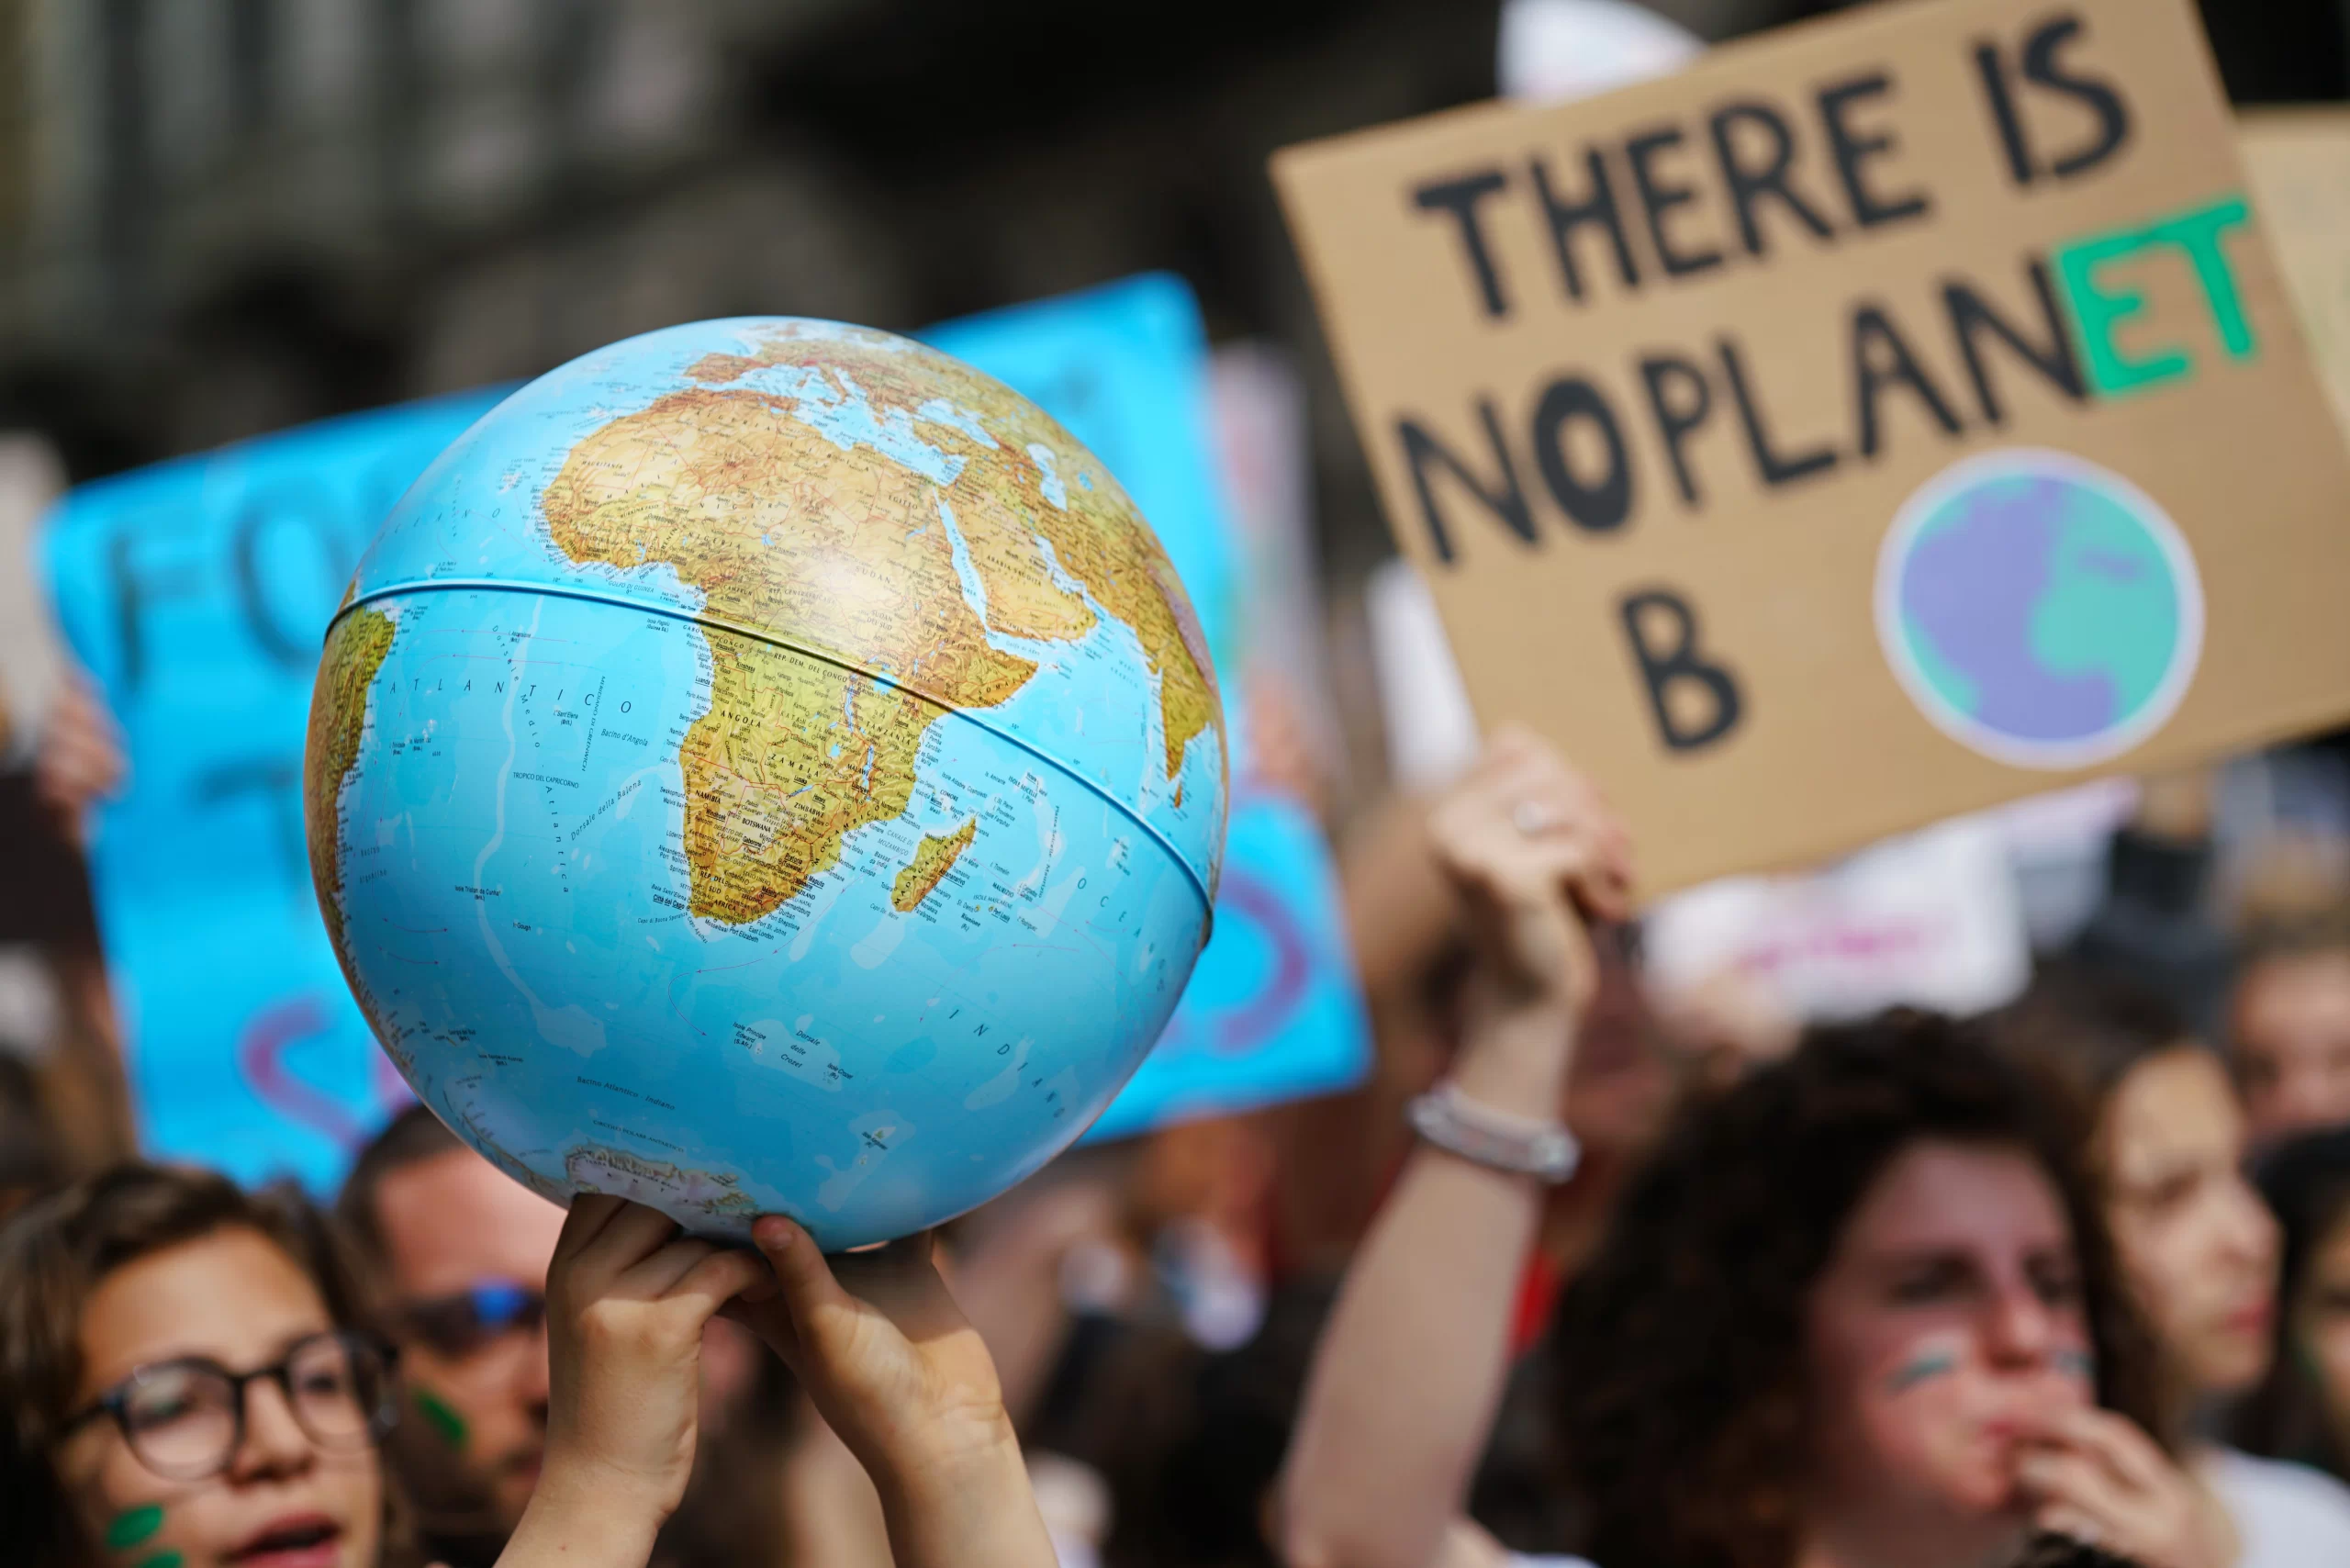 People marching at a Save The Planet march, holding up a globe and a sign that reads “THERE IS NO PLANET B.”